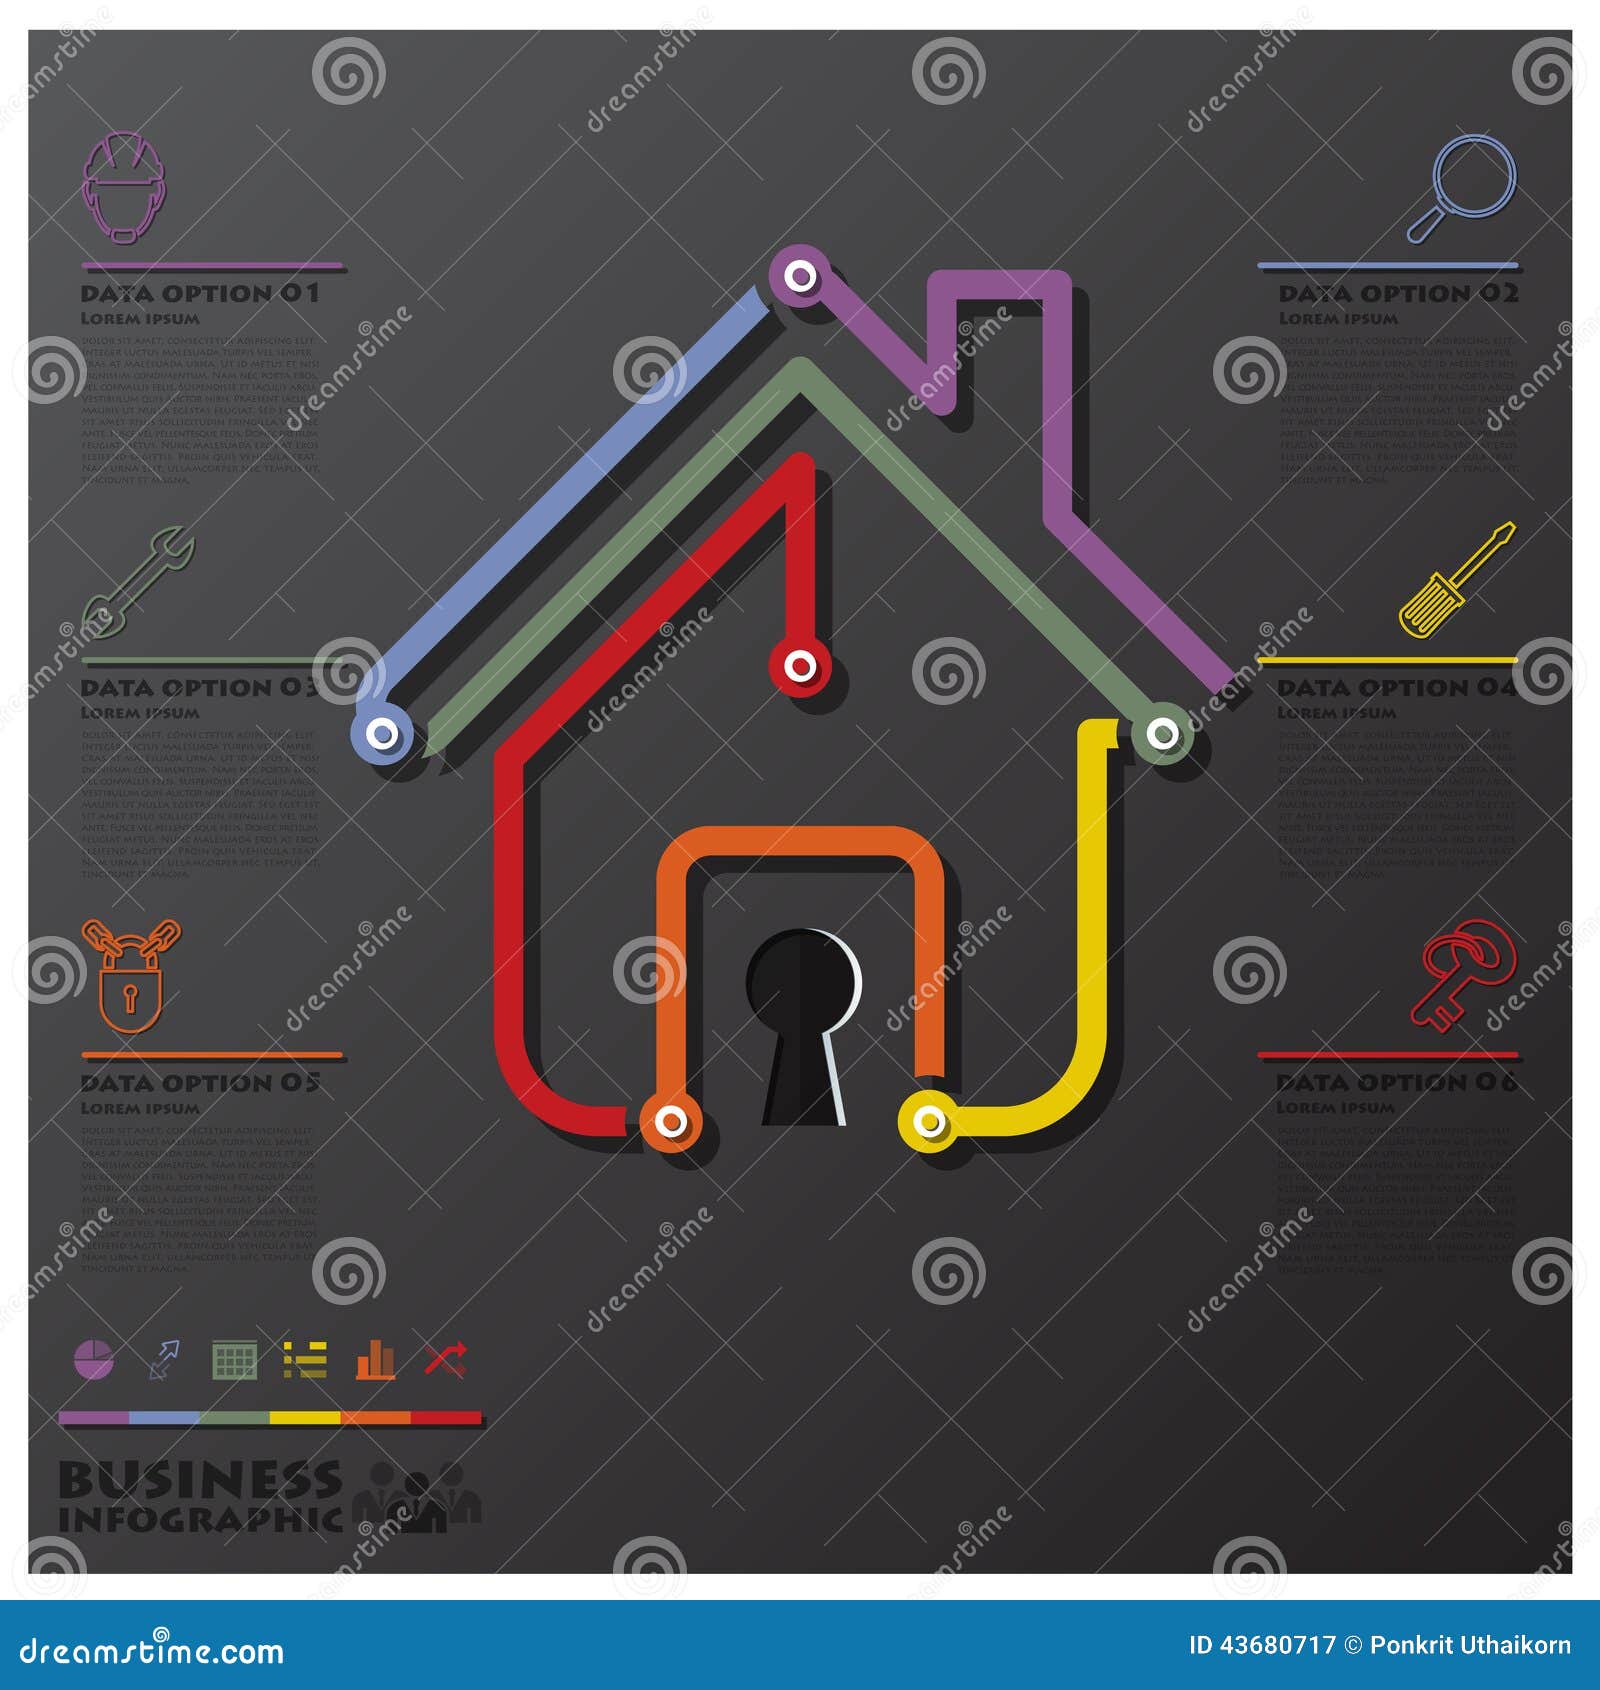 House And Real Estate Connection Timeline Business Infographic Stock Vector - Illustration of ...